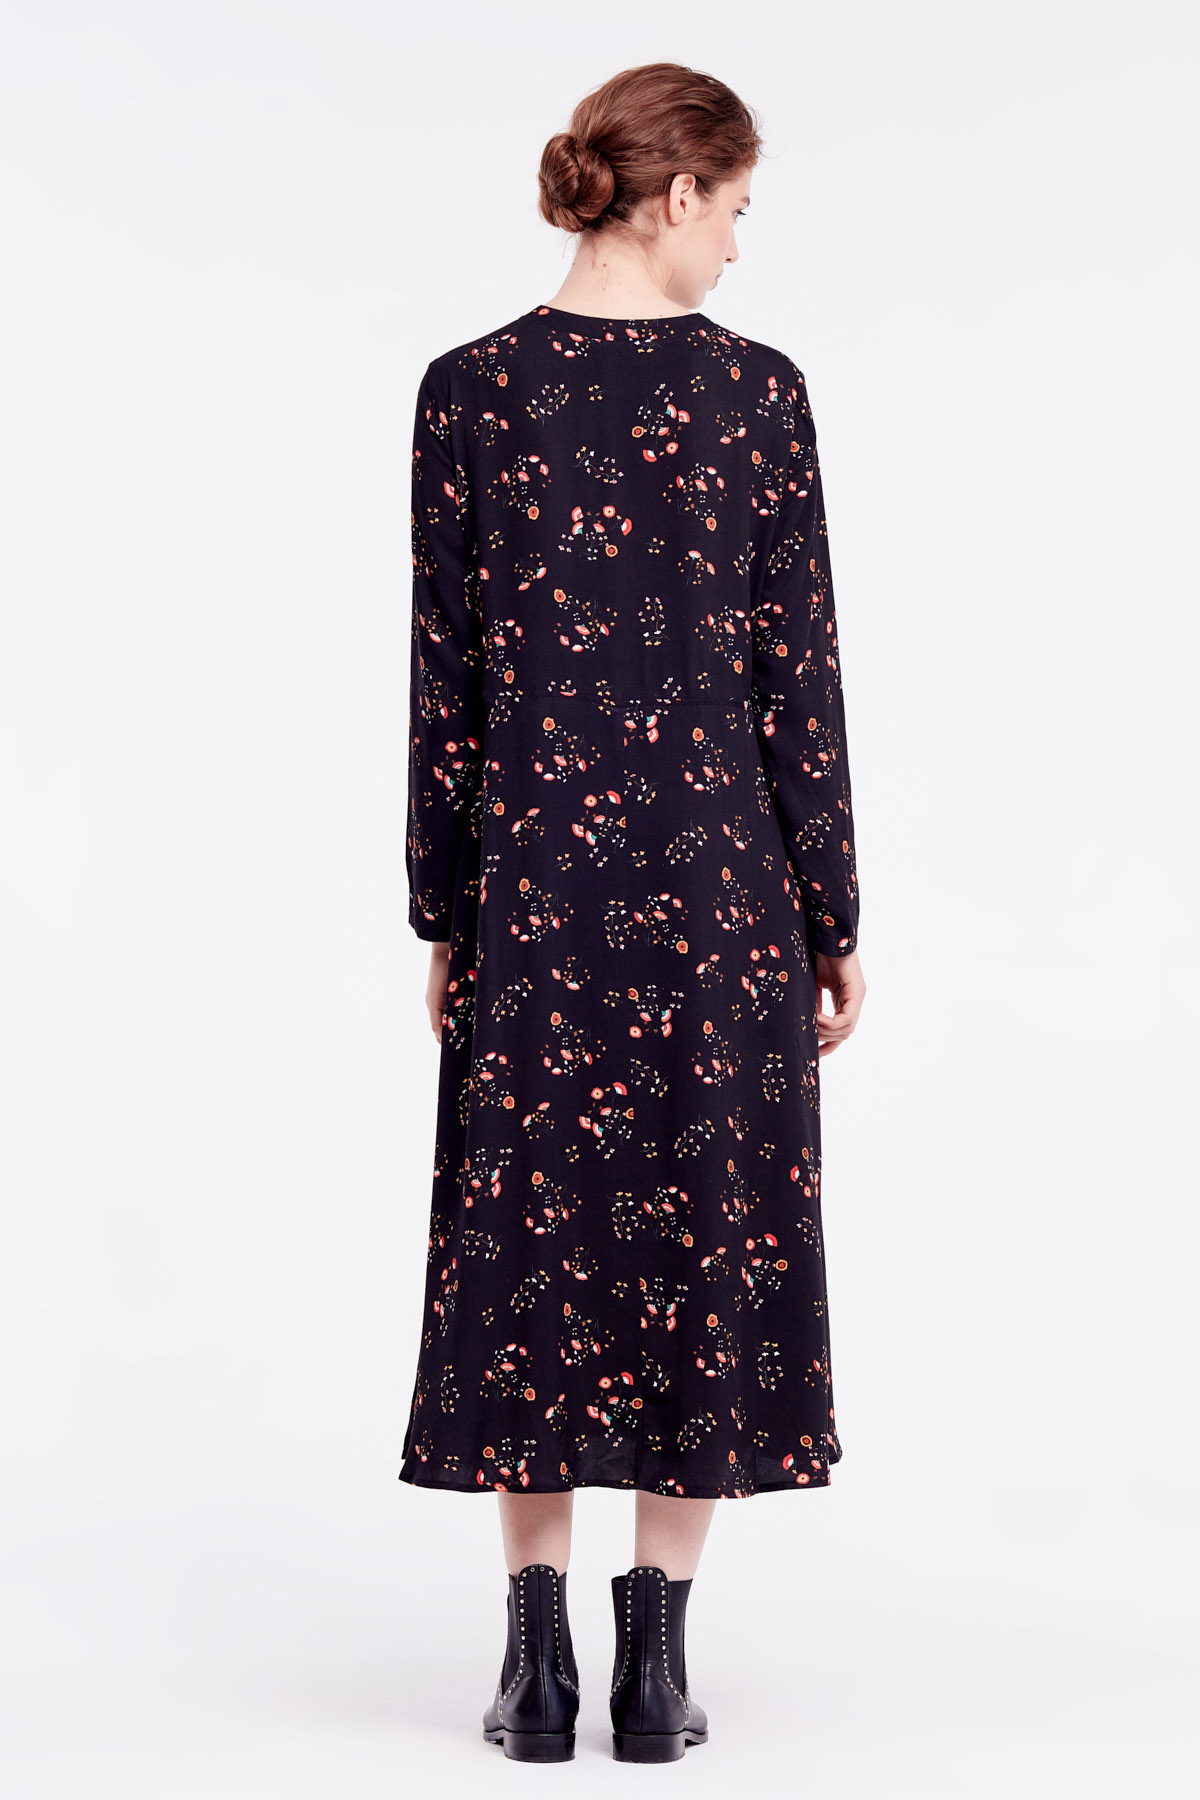 Midi black floral dress with a bow , photo 7